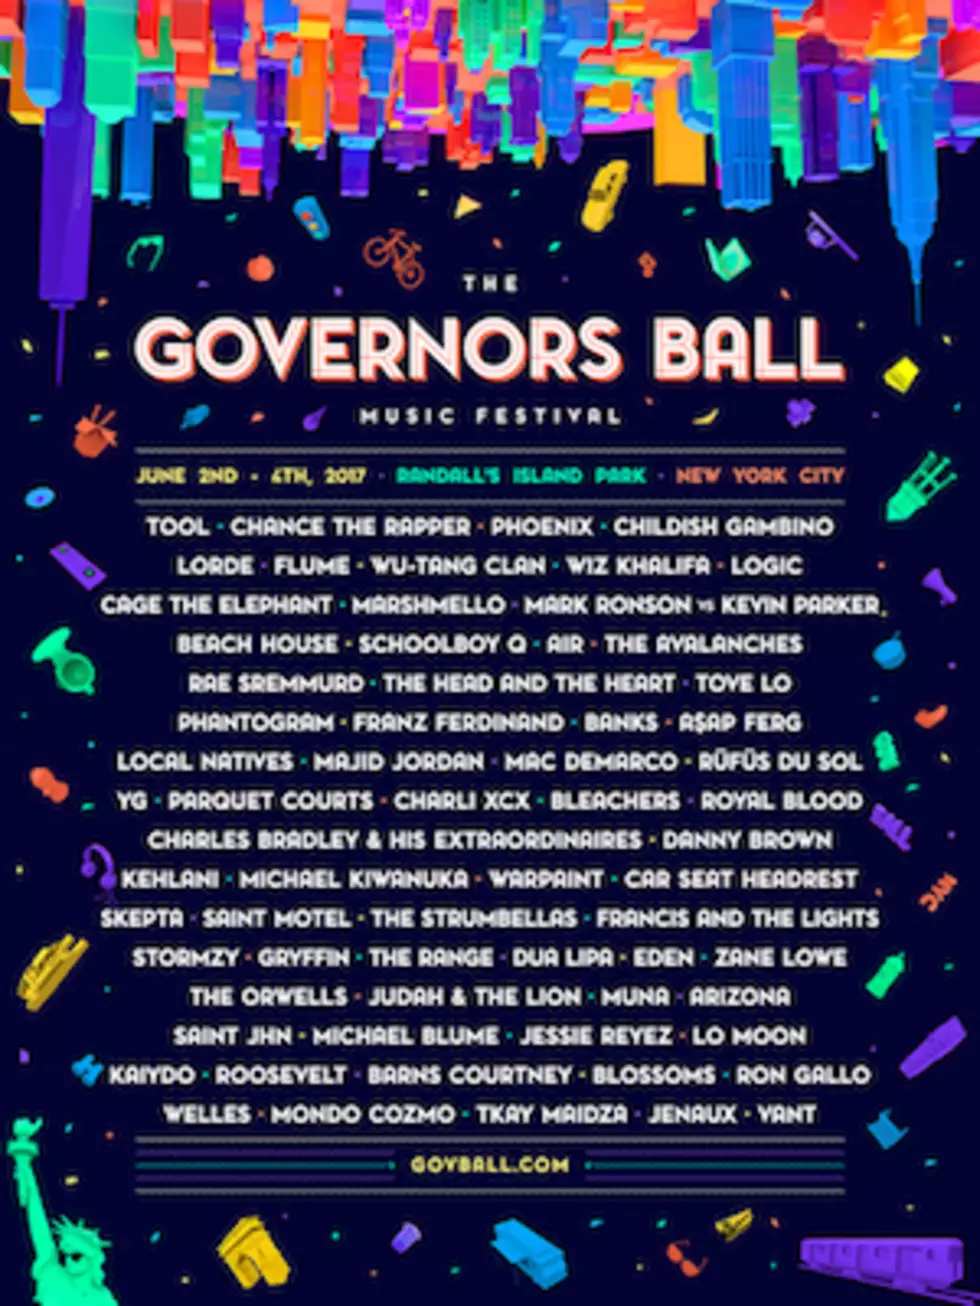 Tool Confirmed to Headline 2017 Governors Ball Music Festival in New York City